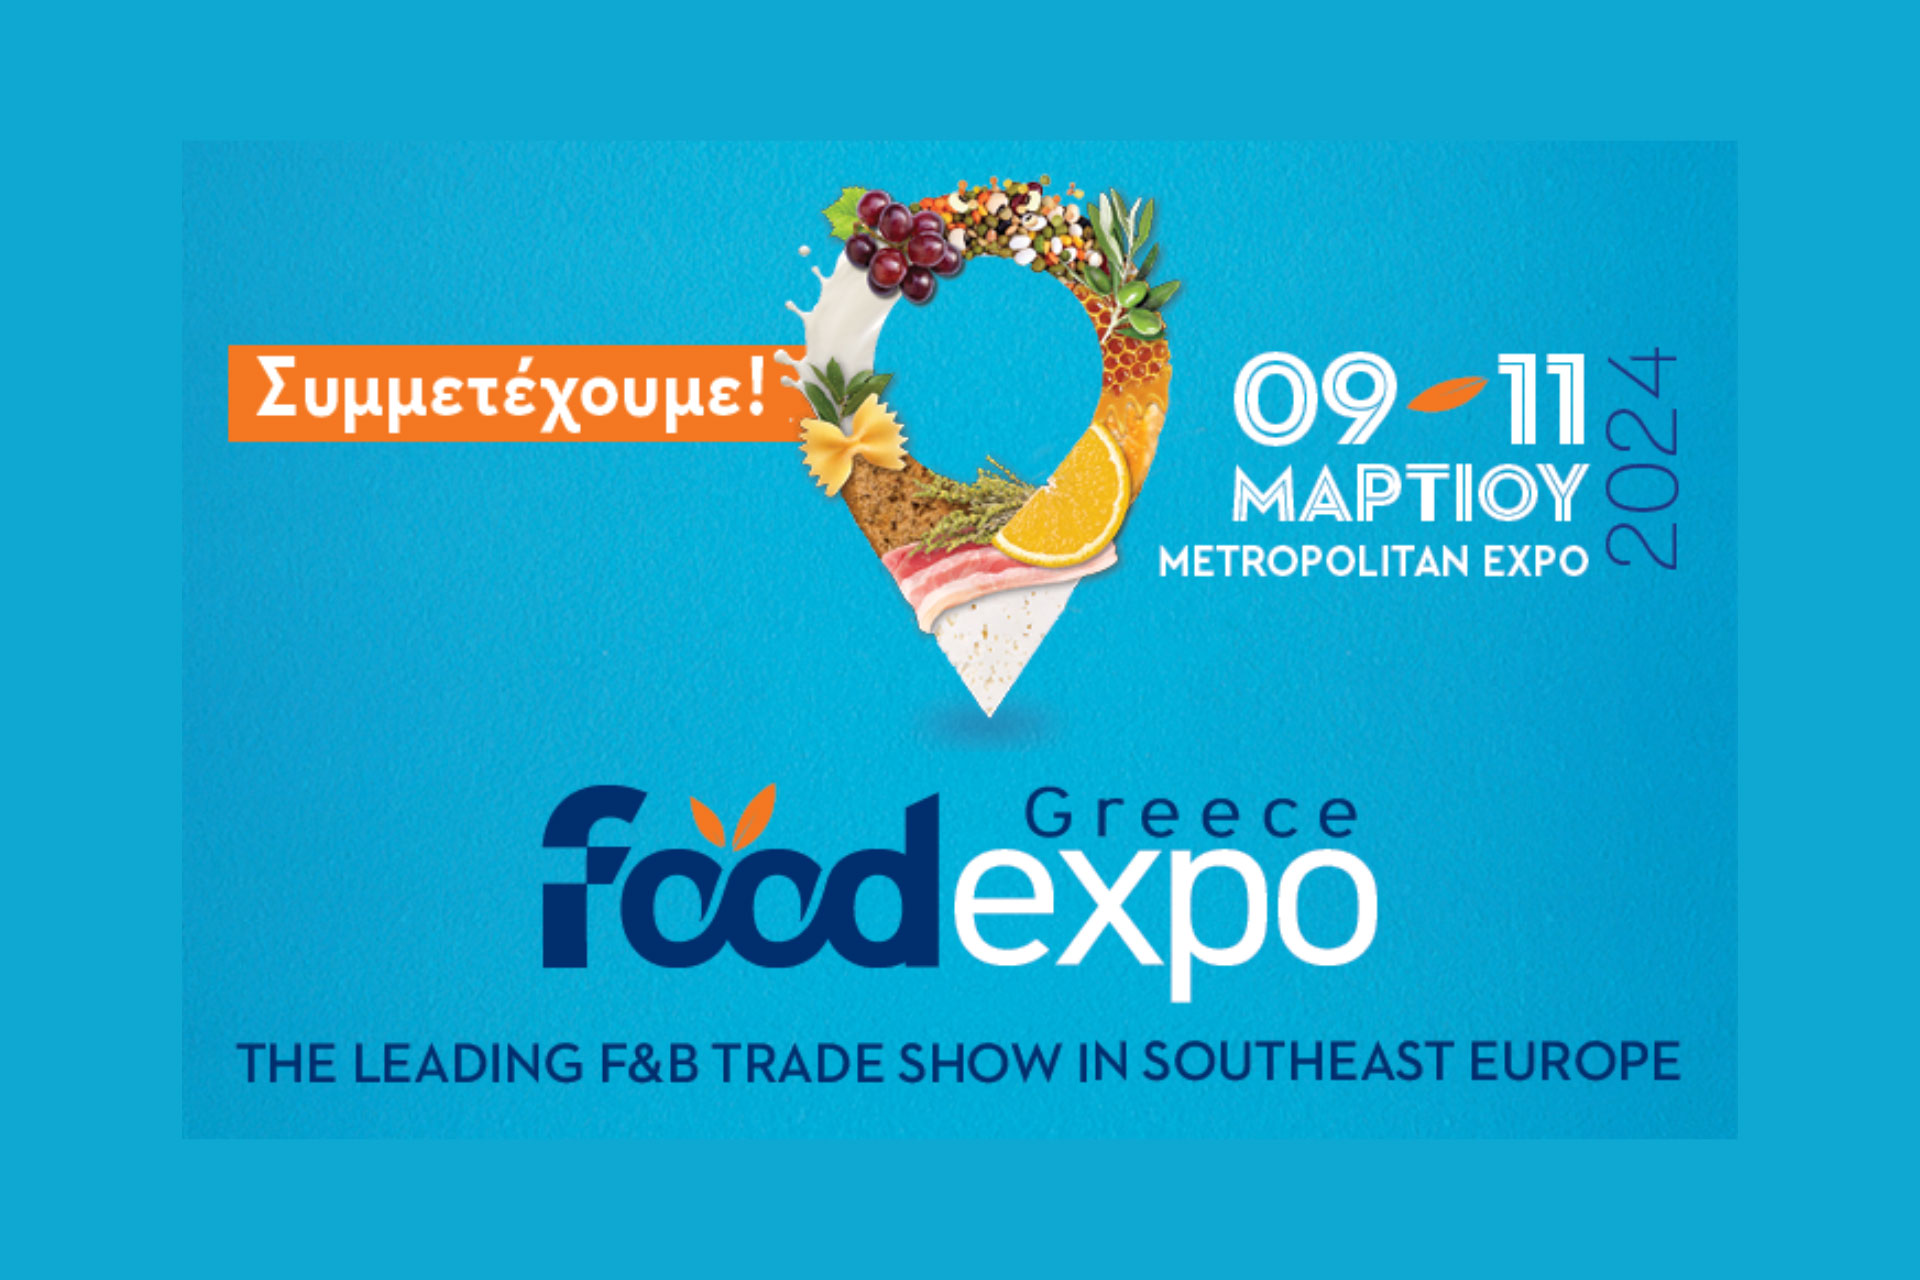 We participate in the Food Expo - Oenotelia  on March 09 - 11 Stand B07